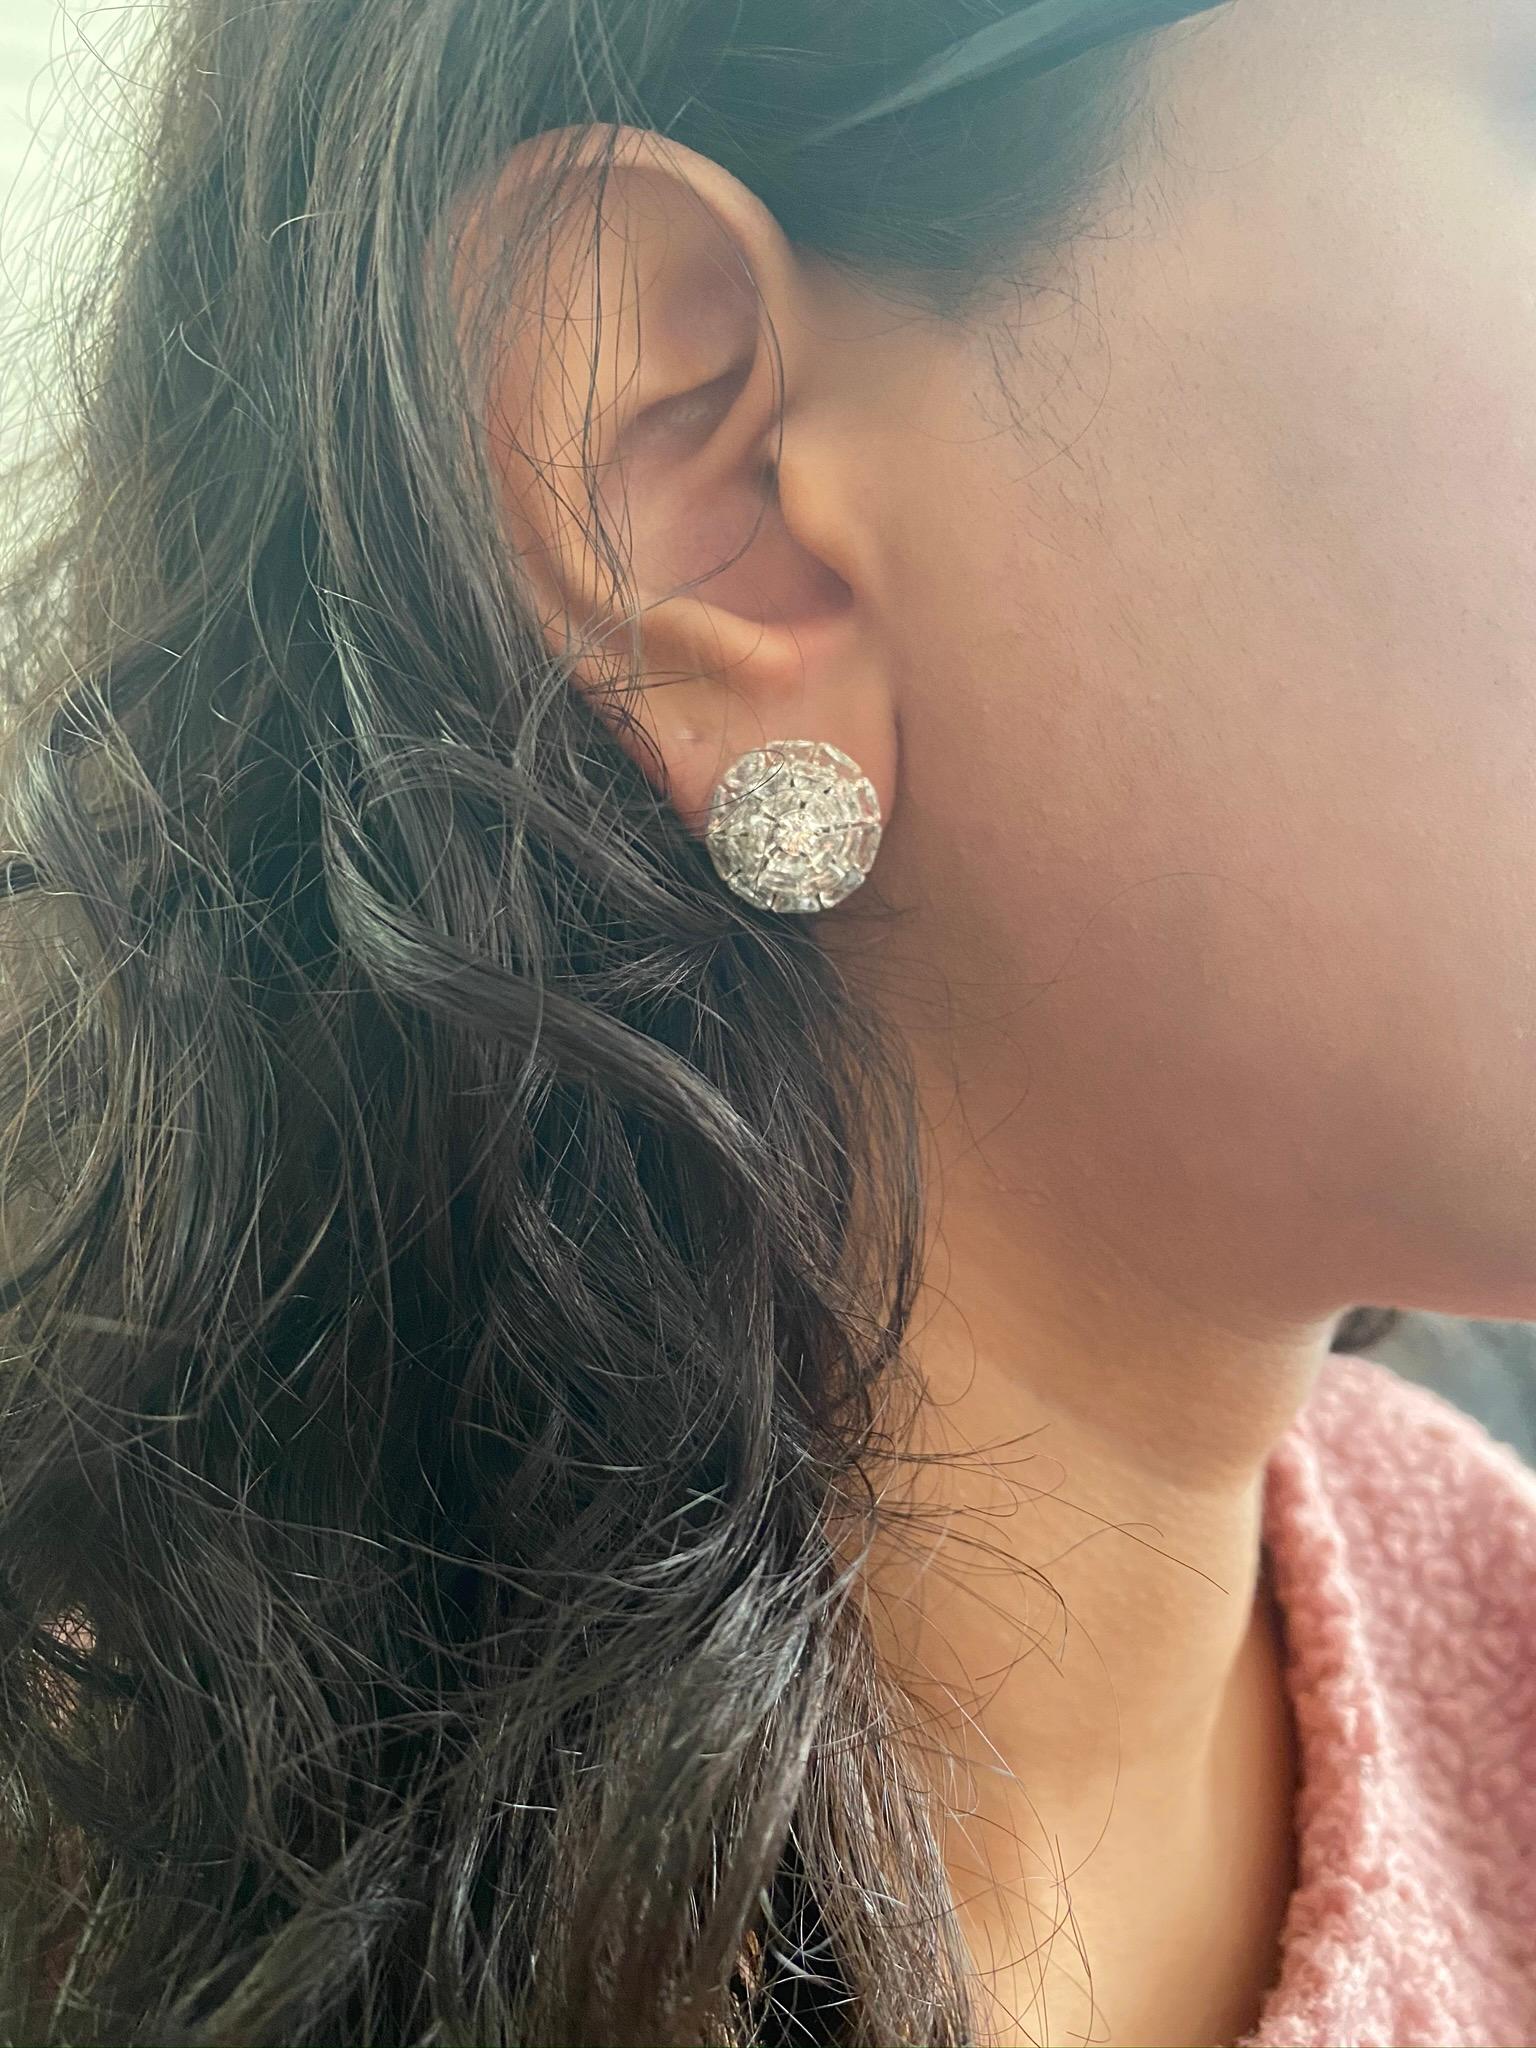 Inspired by the windflower, these earring feature 11.92 carats rose cut diamonds, set intricately around a 0.25 carat center round brilliant diamonds, in a floral motif.

Diamond Details
Shape Triangular Rose Cut 
Color F
Clarity VVS
Weight 11.91